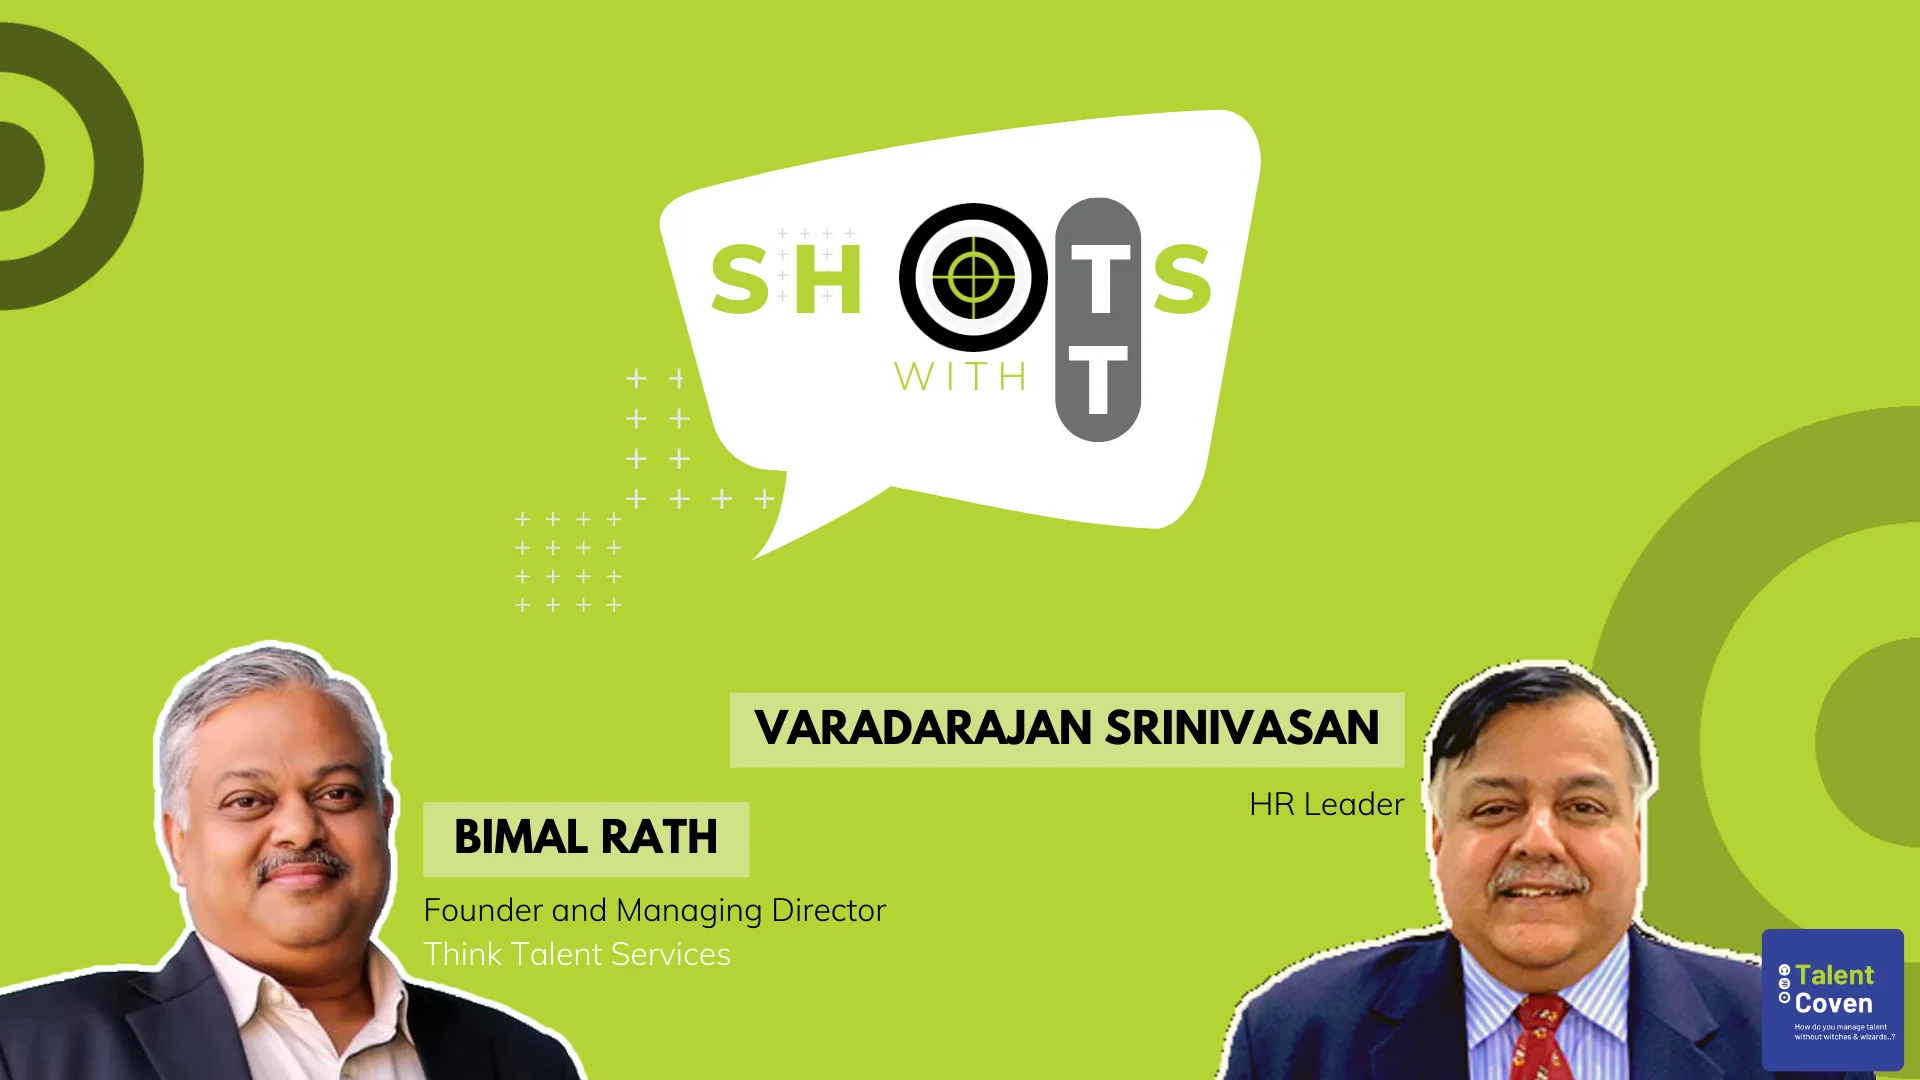 Podcast episode cover featuring Varadarajan Srinivasan discussing Perspectives on Talent across industries